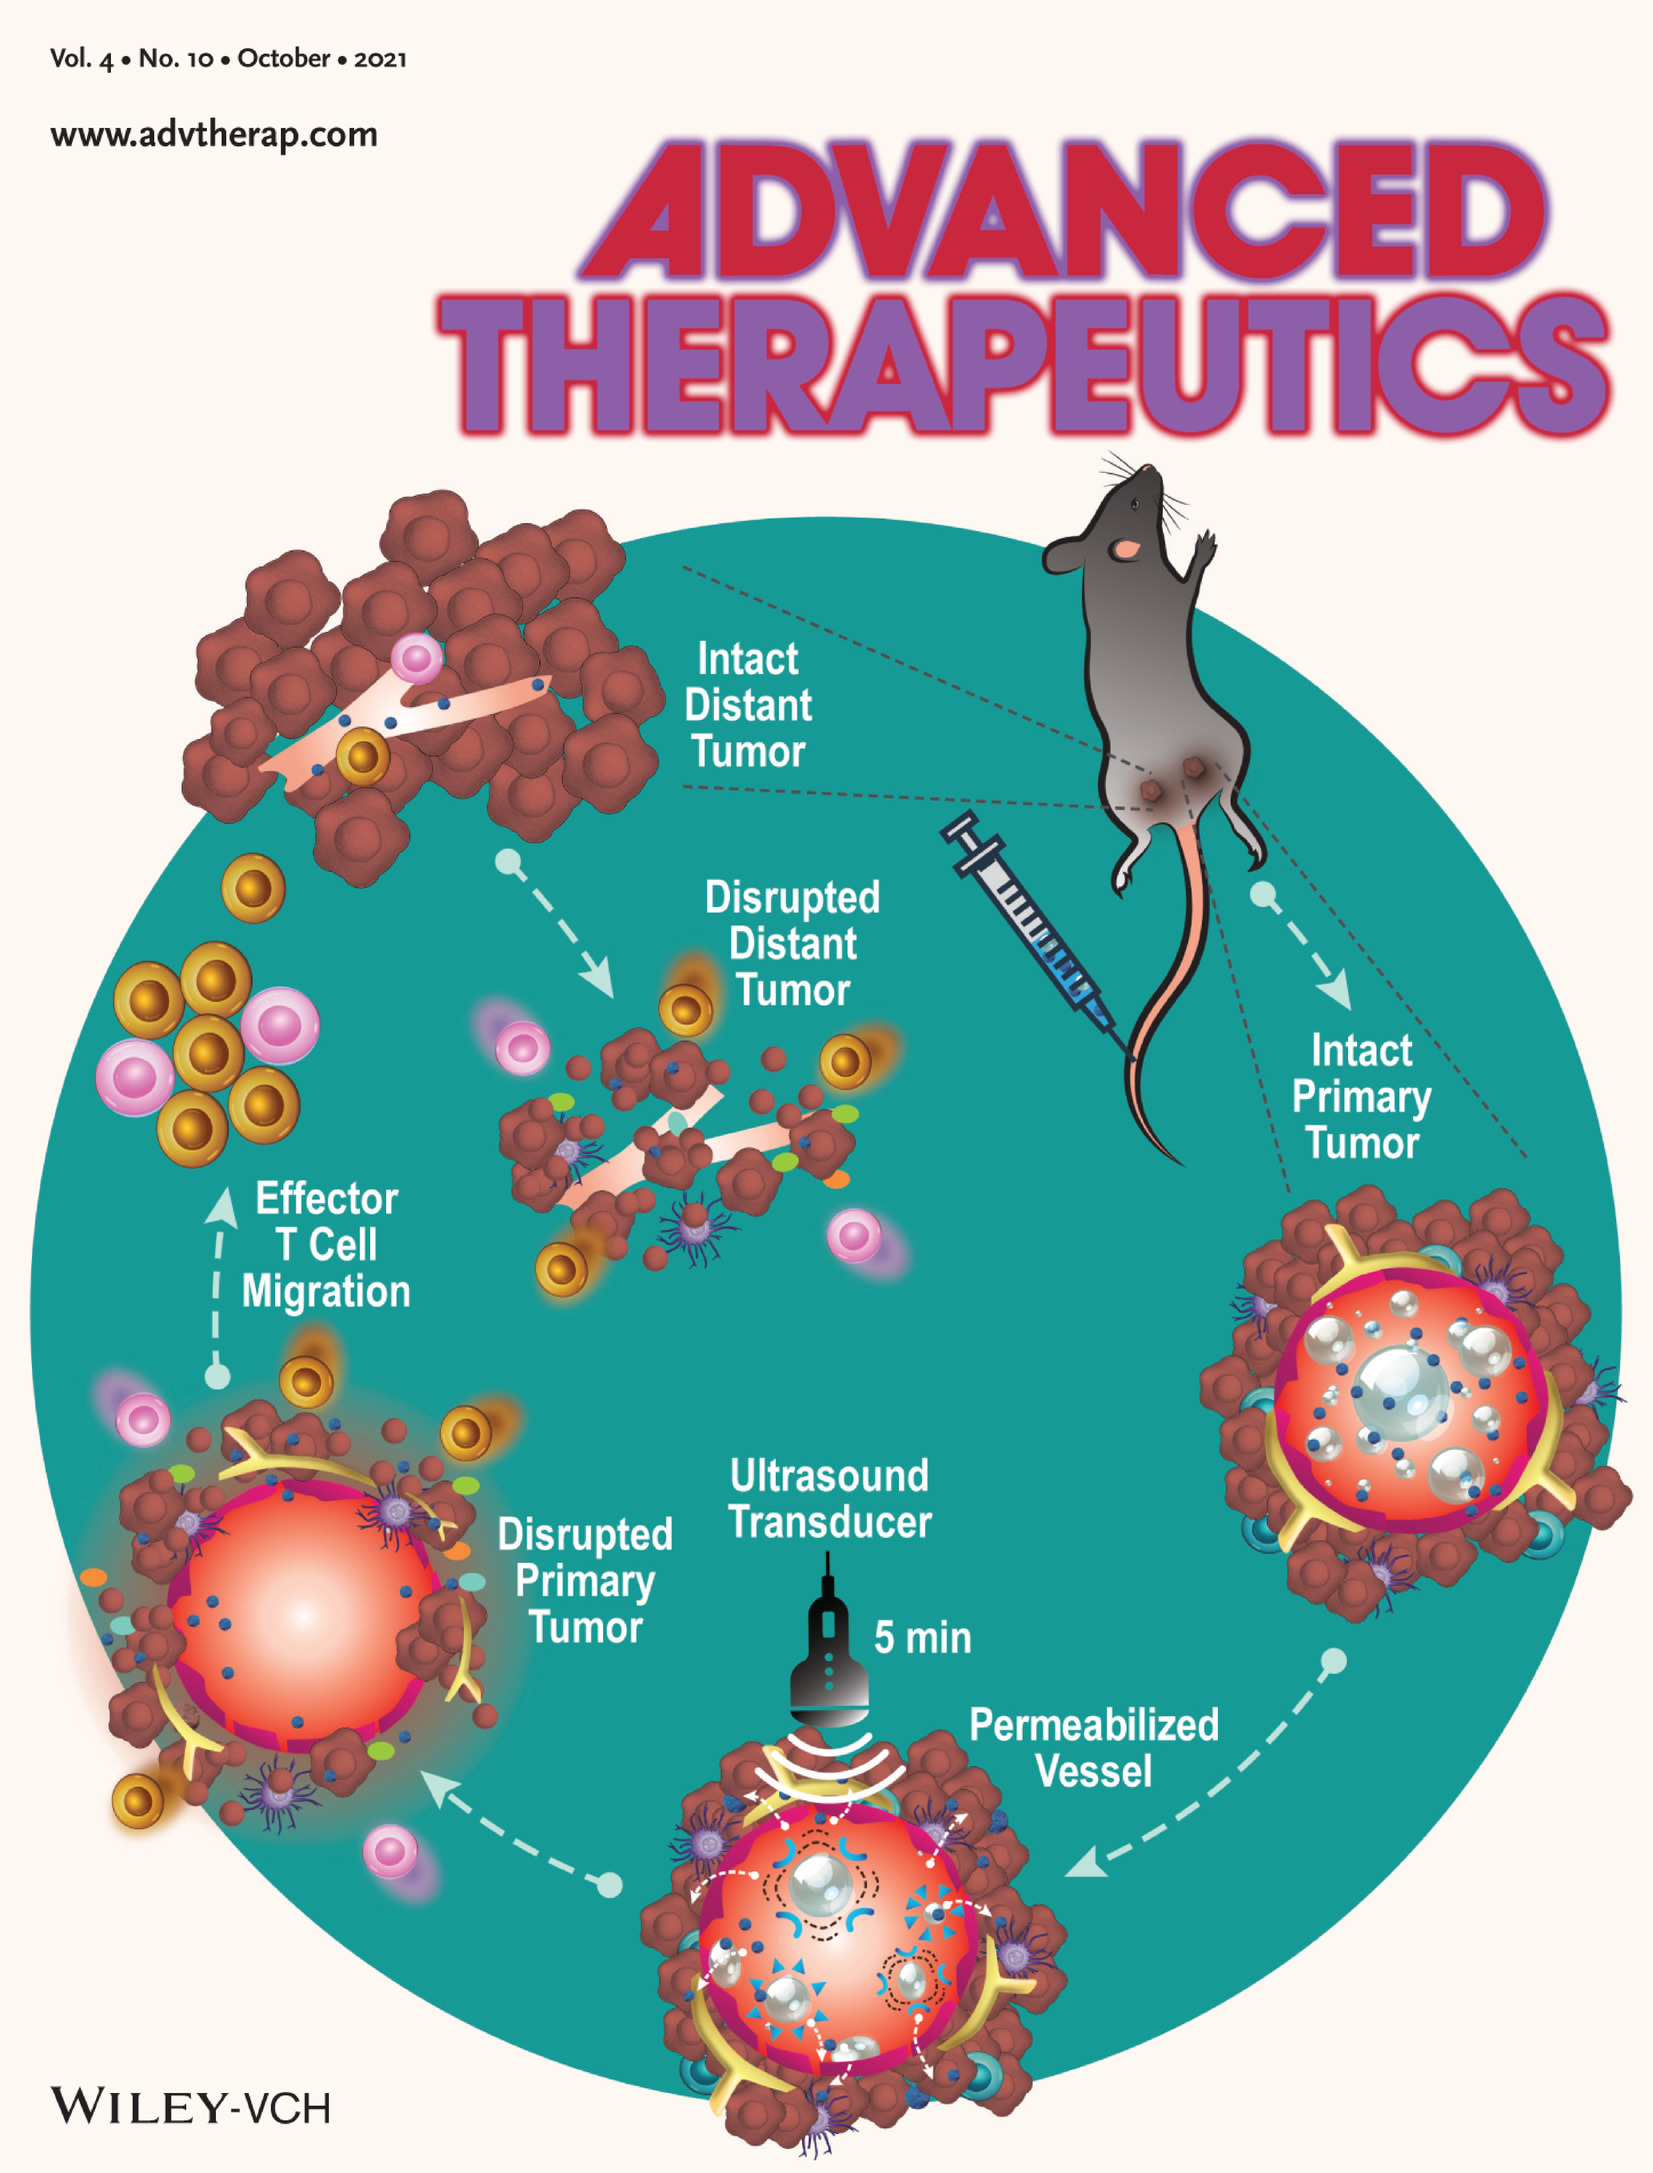 Sonoporation‐Enhanced Delivery of STING Agonist Induced Robust Immune Modulation and Tumor Regression (Adv. Therap. 10/2021)